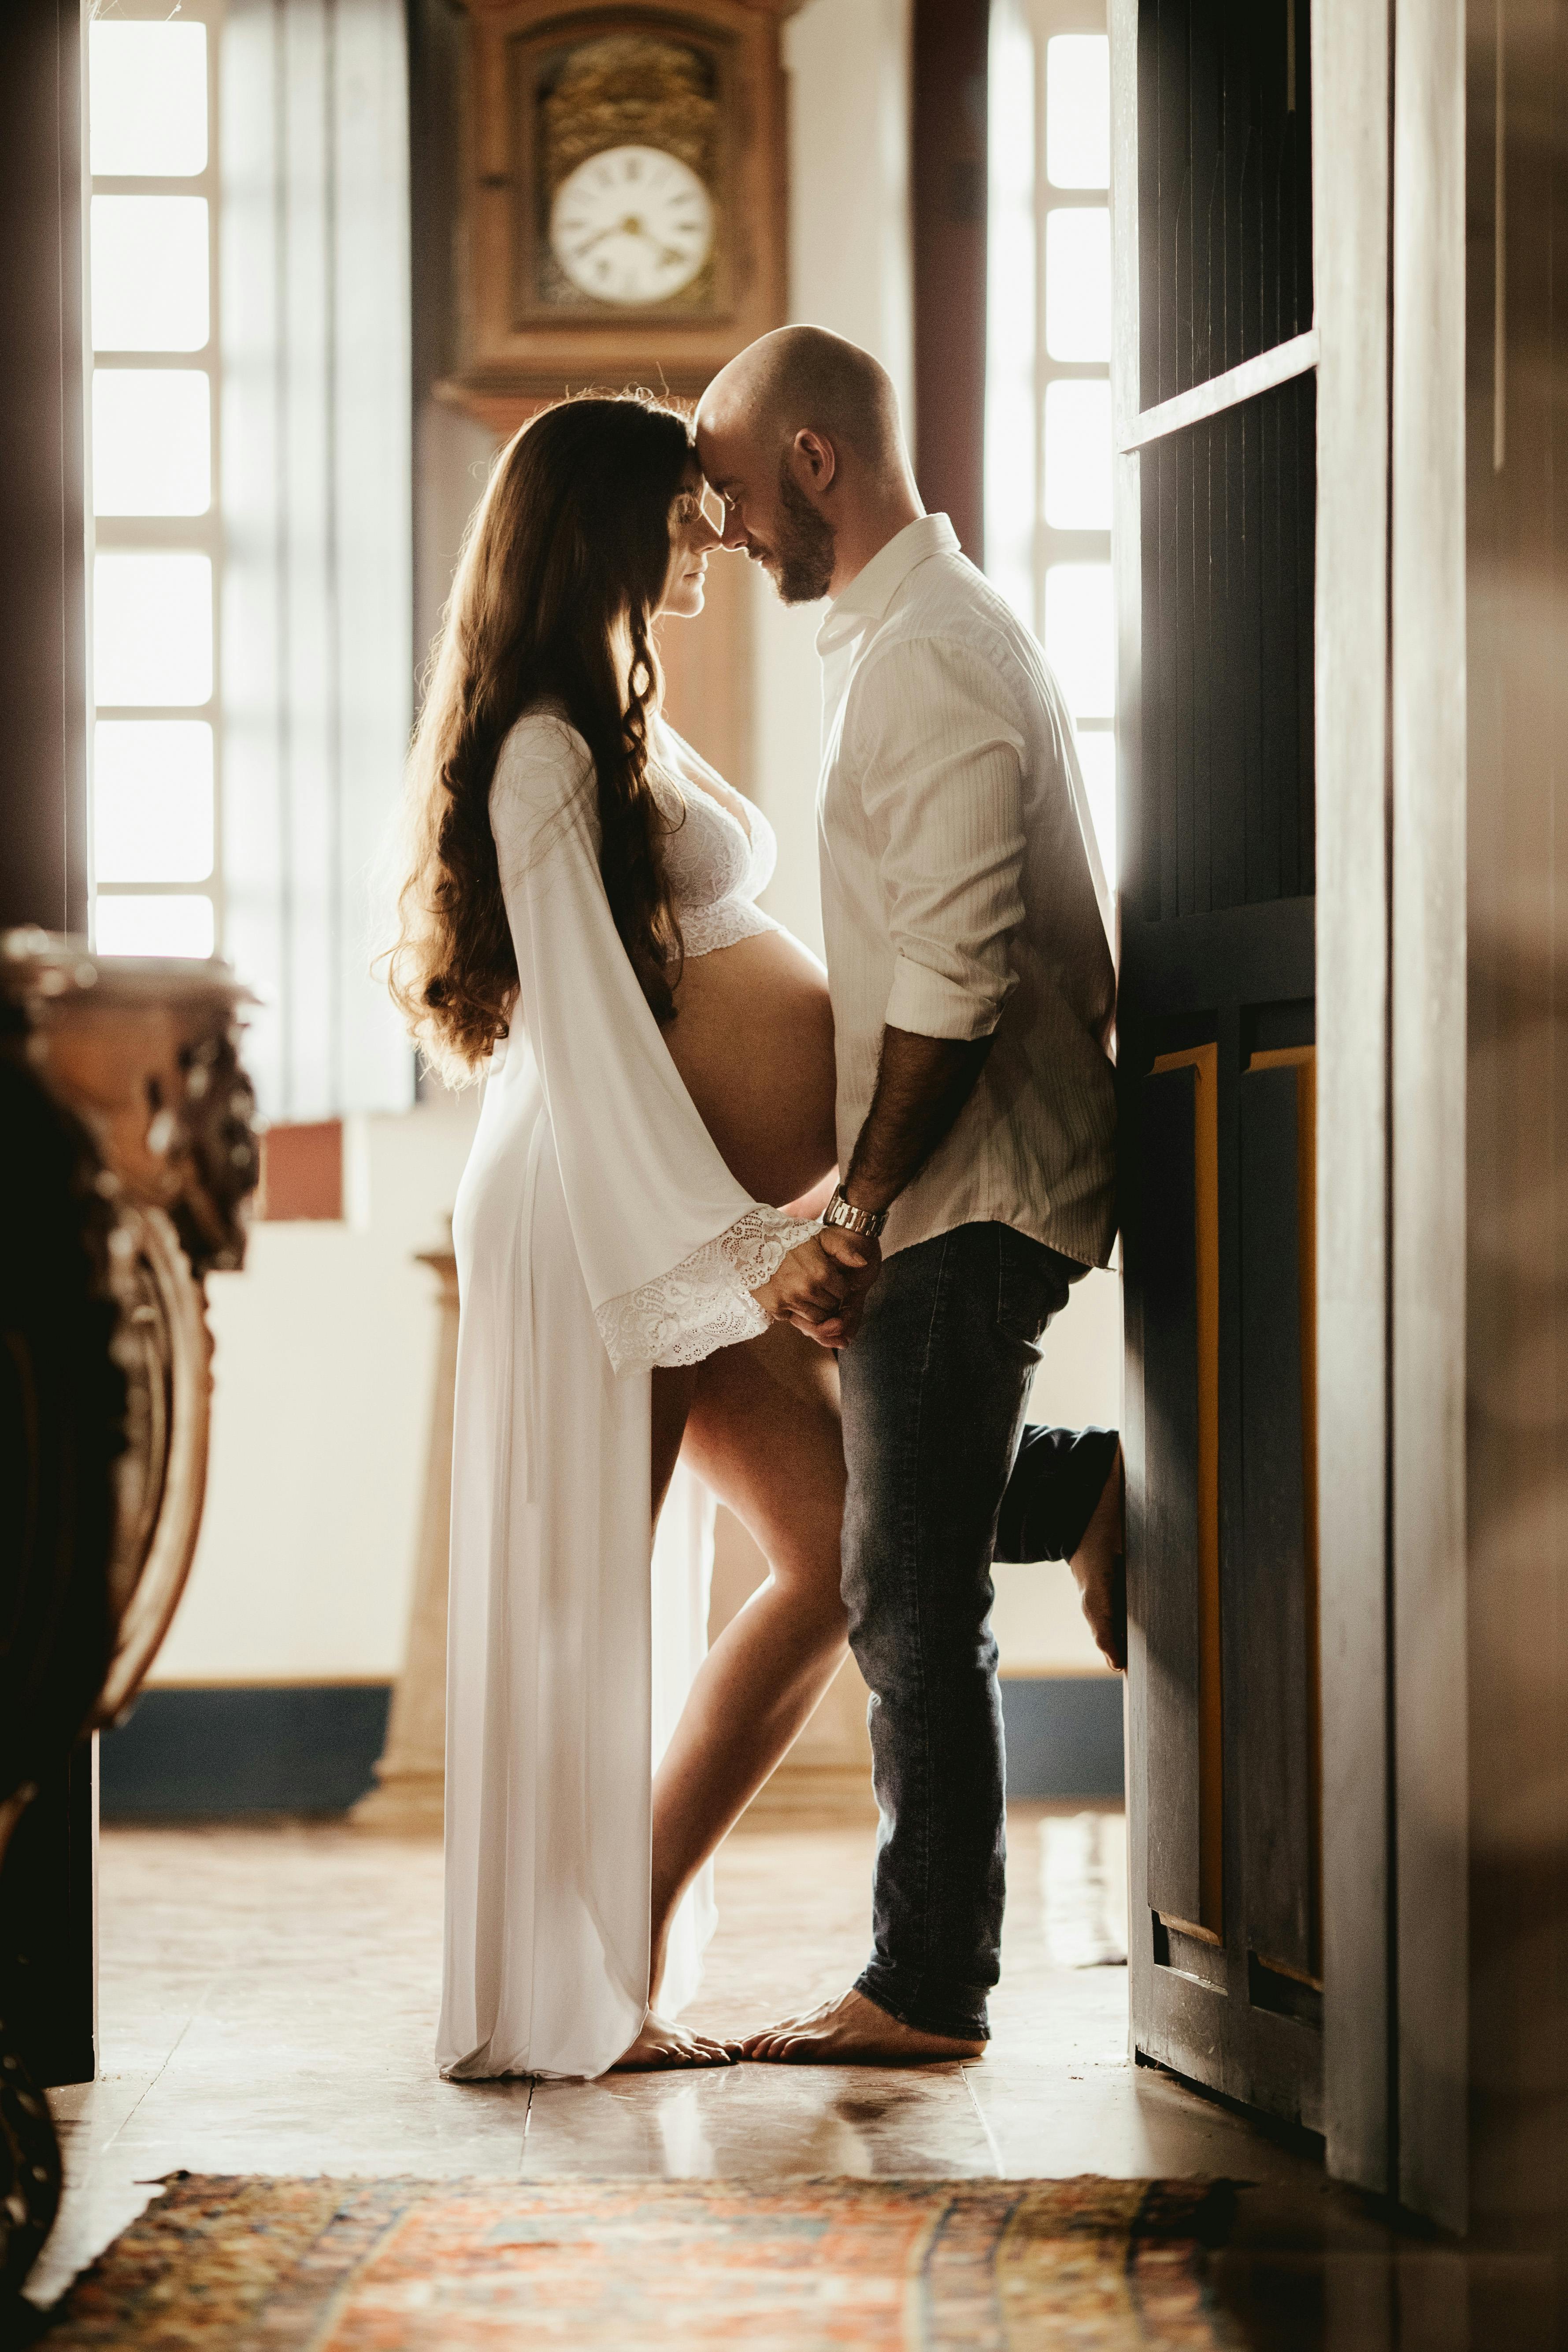 16 Babymoon Photoshoot Ideas, Classy and Out of the Box Suggestions |  Maternity photography poses couple, Couple pregnancy photoshoot, Maternity  photography poses outdoors